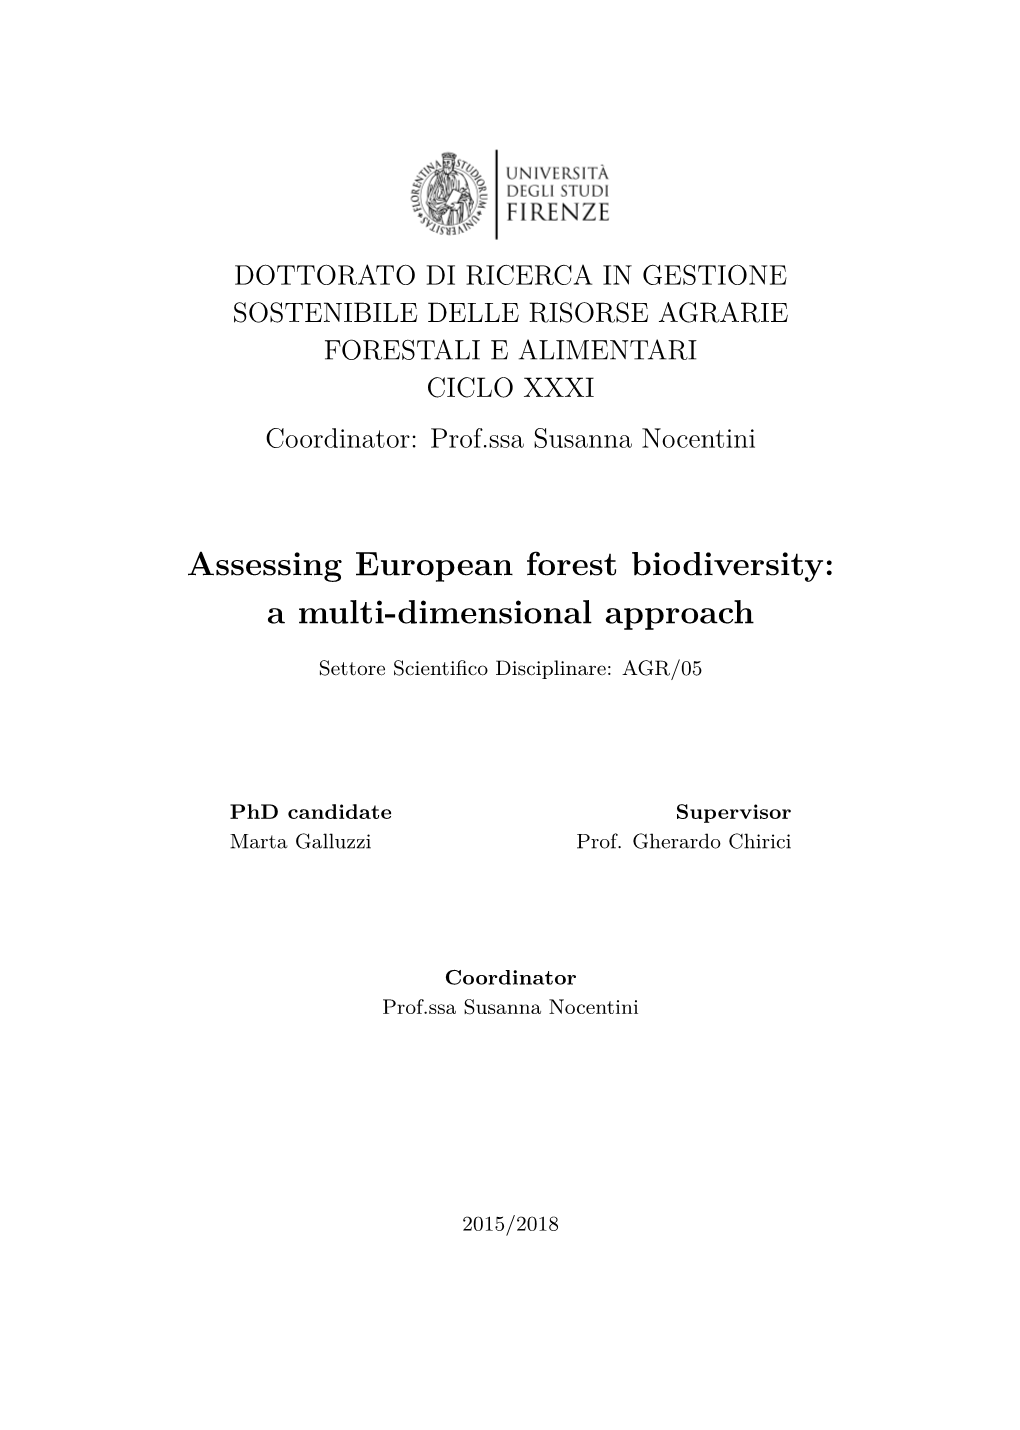 Assessing European Forest Biodiversity: a Multi-Dimensional Approach